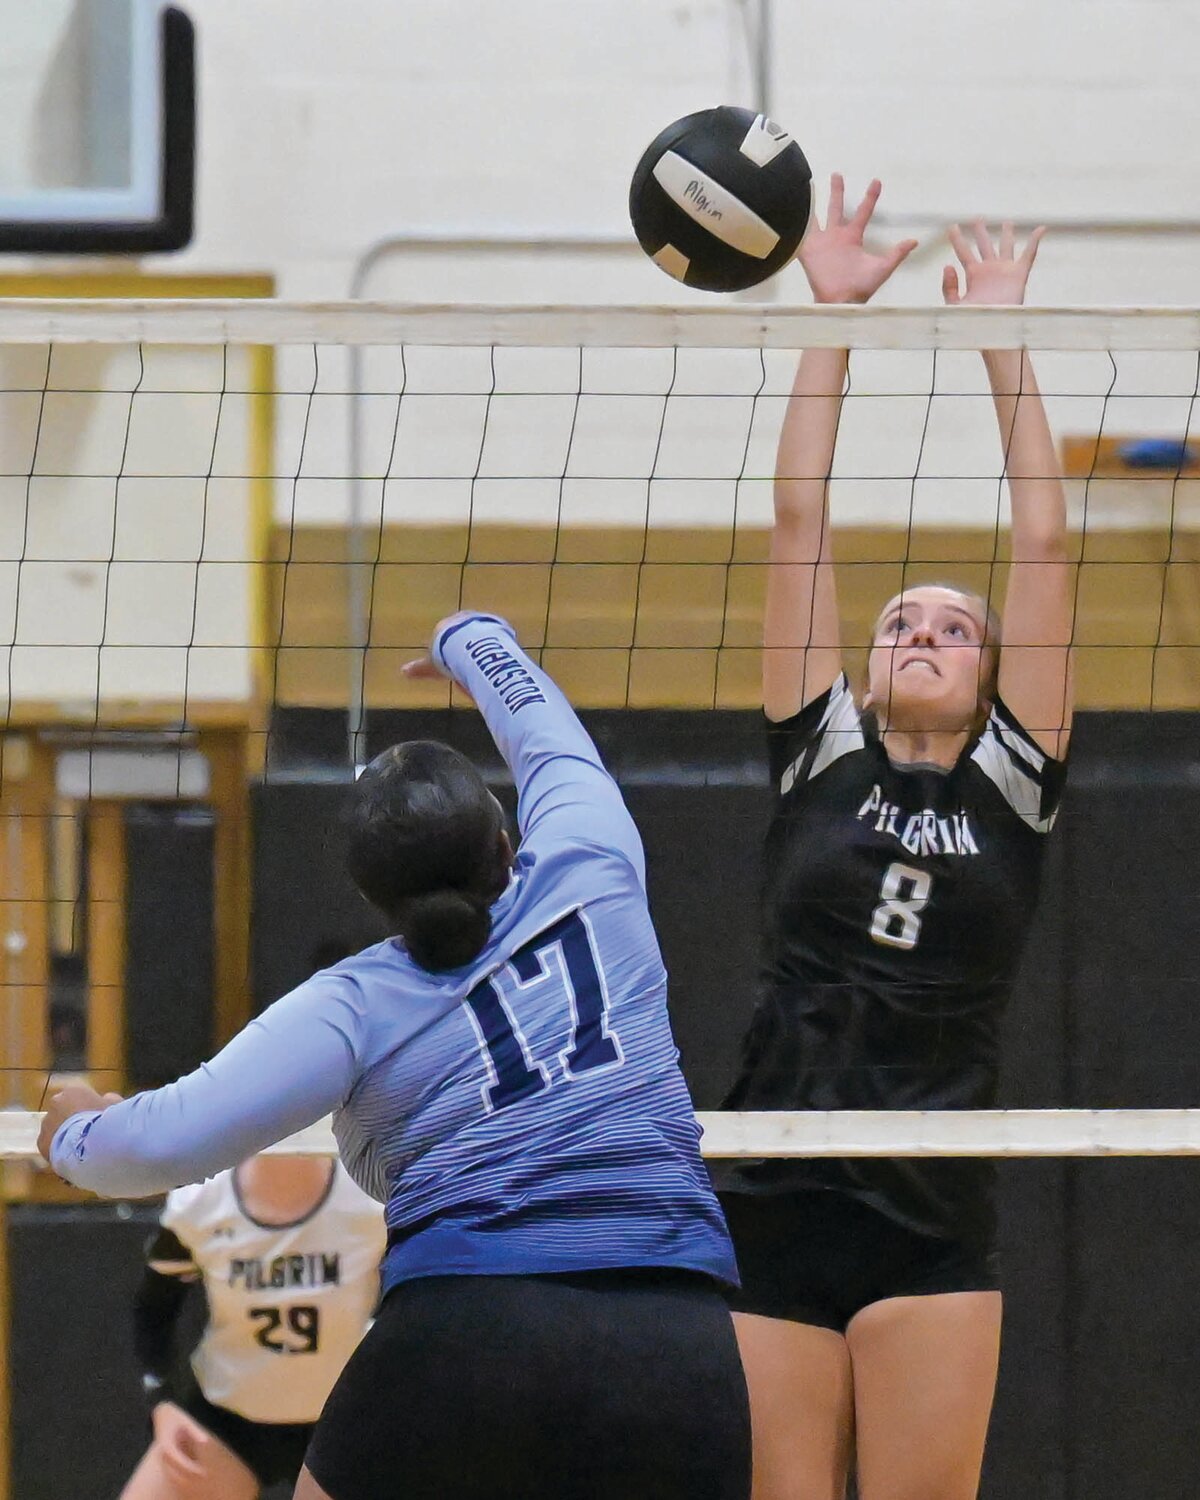 AT THE NET: Pilgrim’s Avery
Adams leaps to block a
shot in a match this fall.